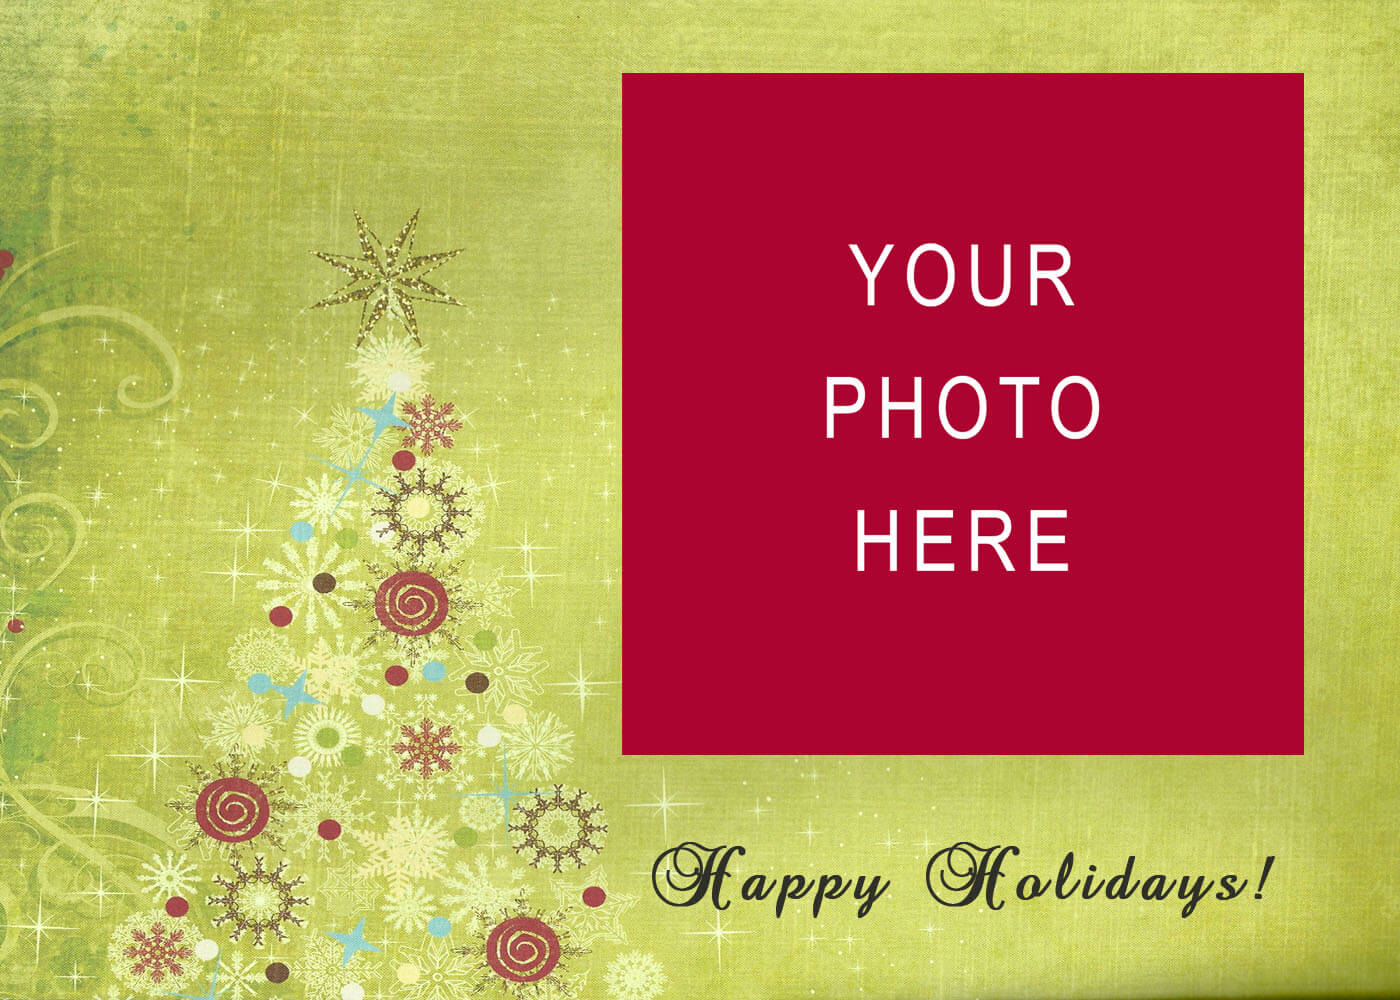 Christmas Greeting Cards Templates Free - Zohre With Regard To Christmas Photo Cards Templates Free Downloads